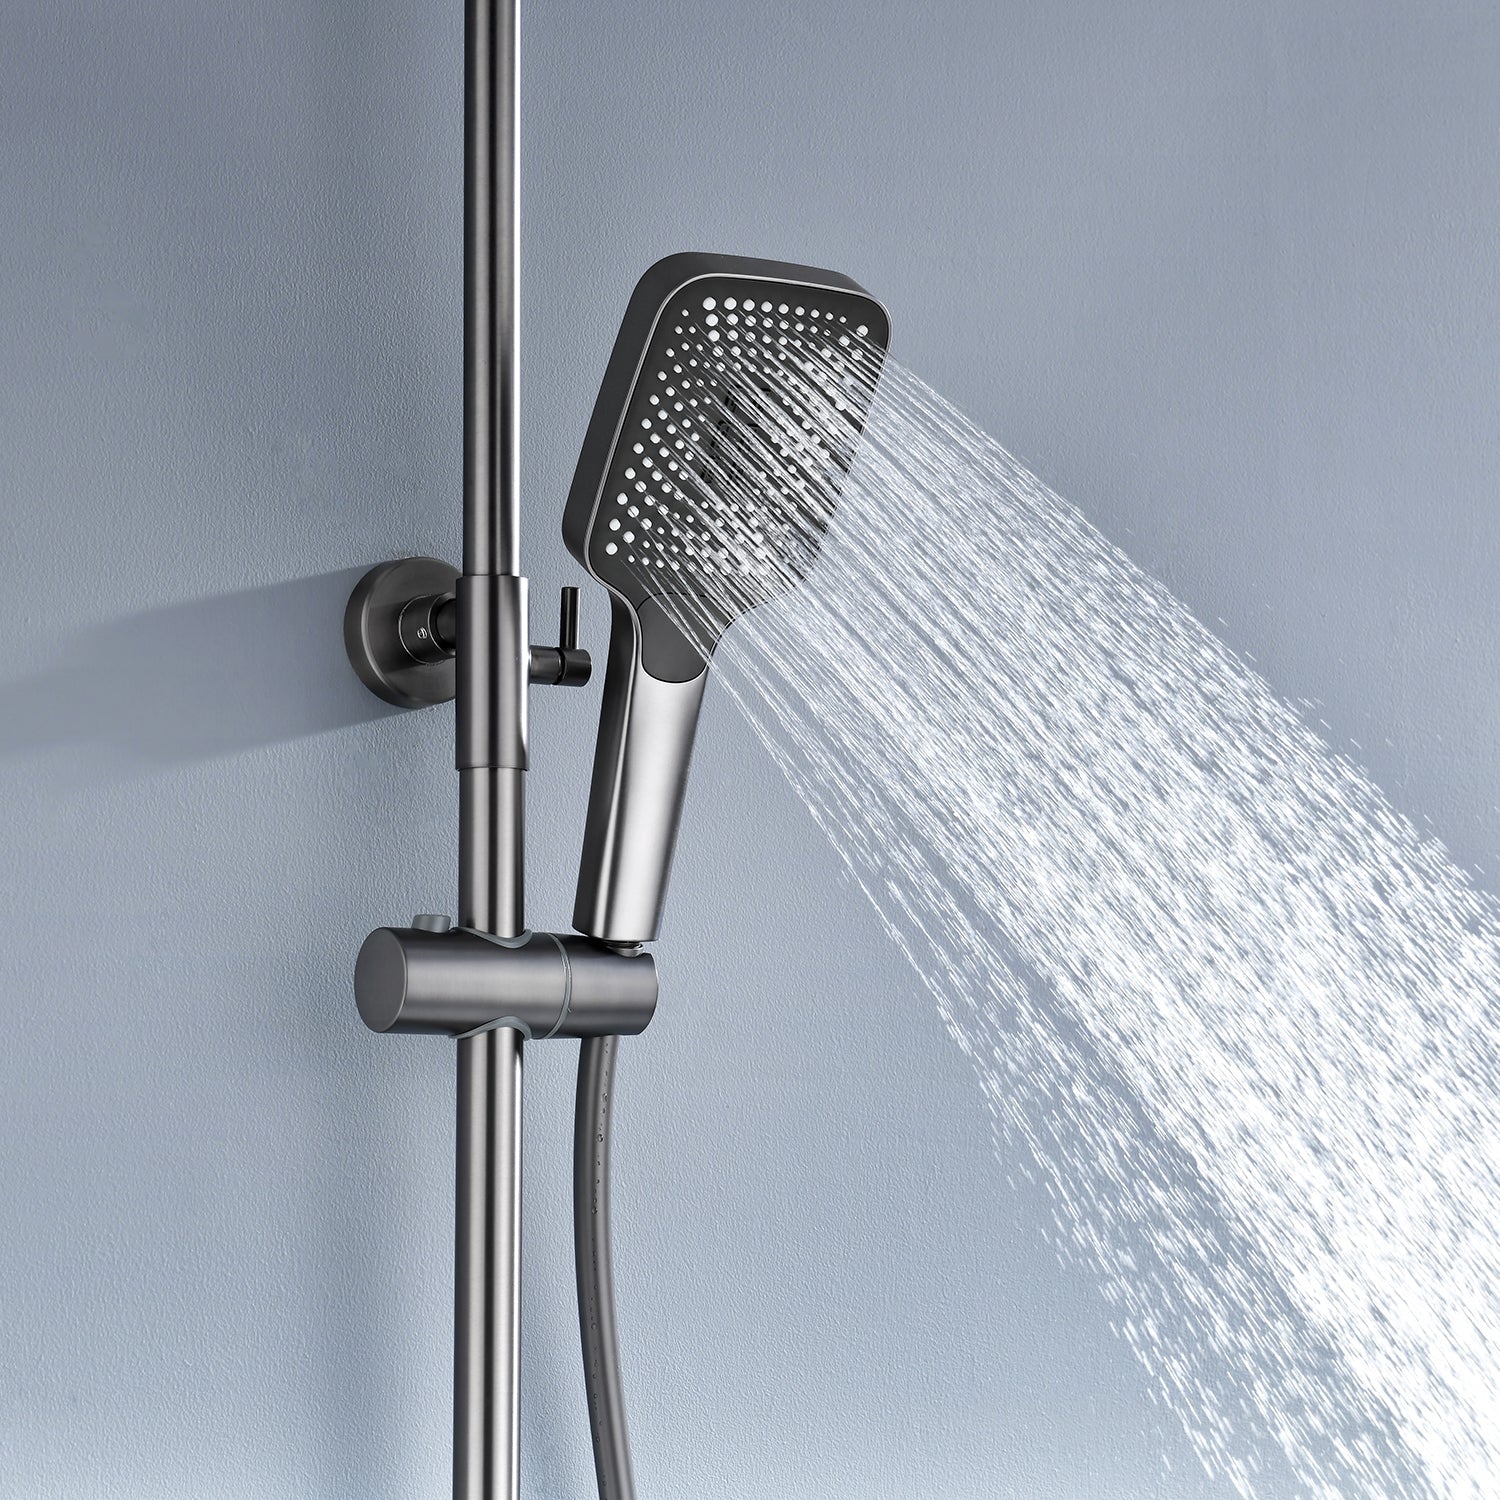 Lefton Thermostatic Shower System With Temperature Display And 4 Water Outlet Modes (Batteries-free) SST2205 -Shower Systems- Lefton Home